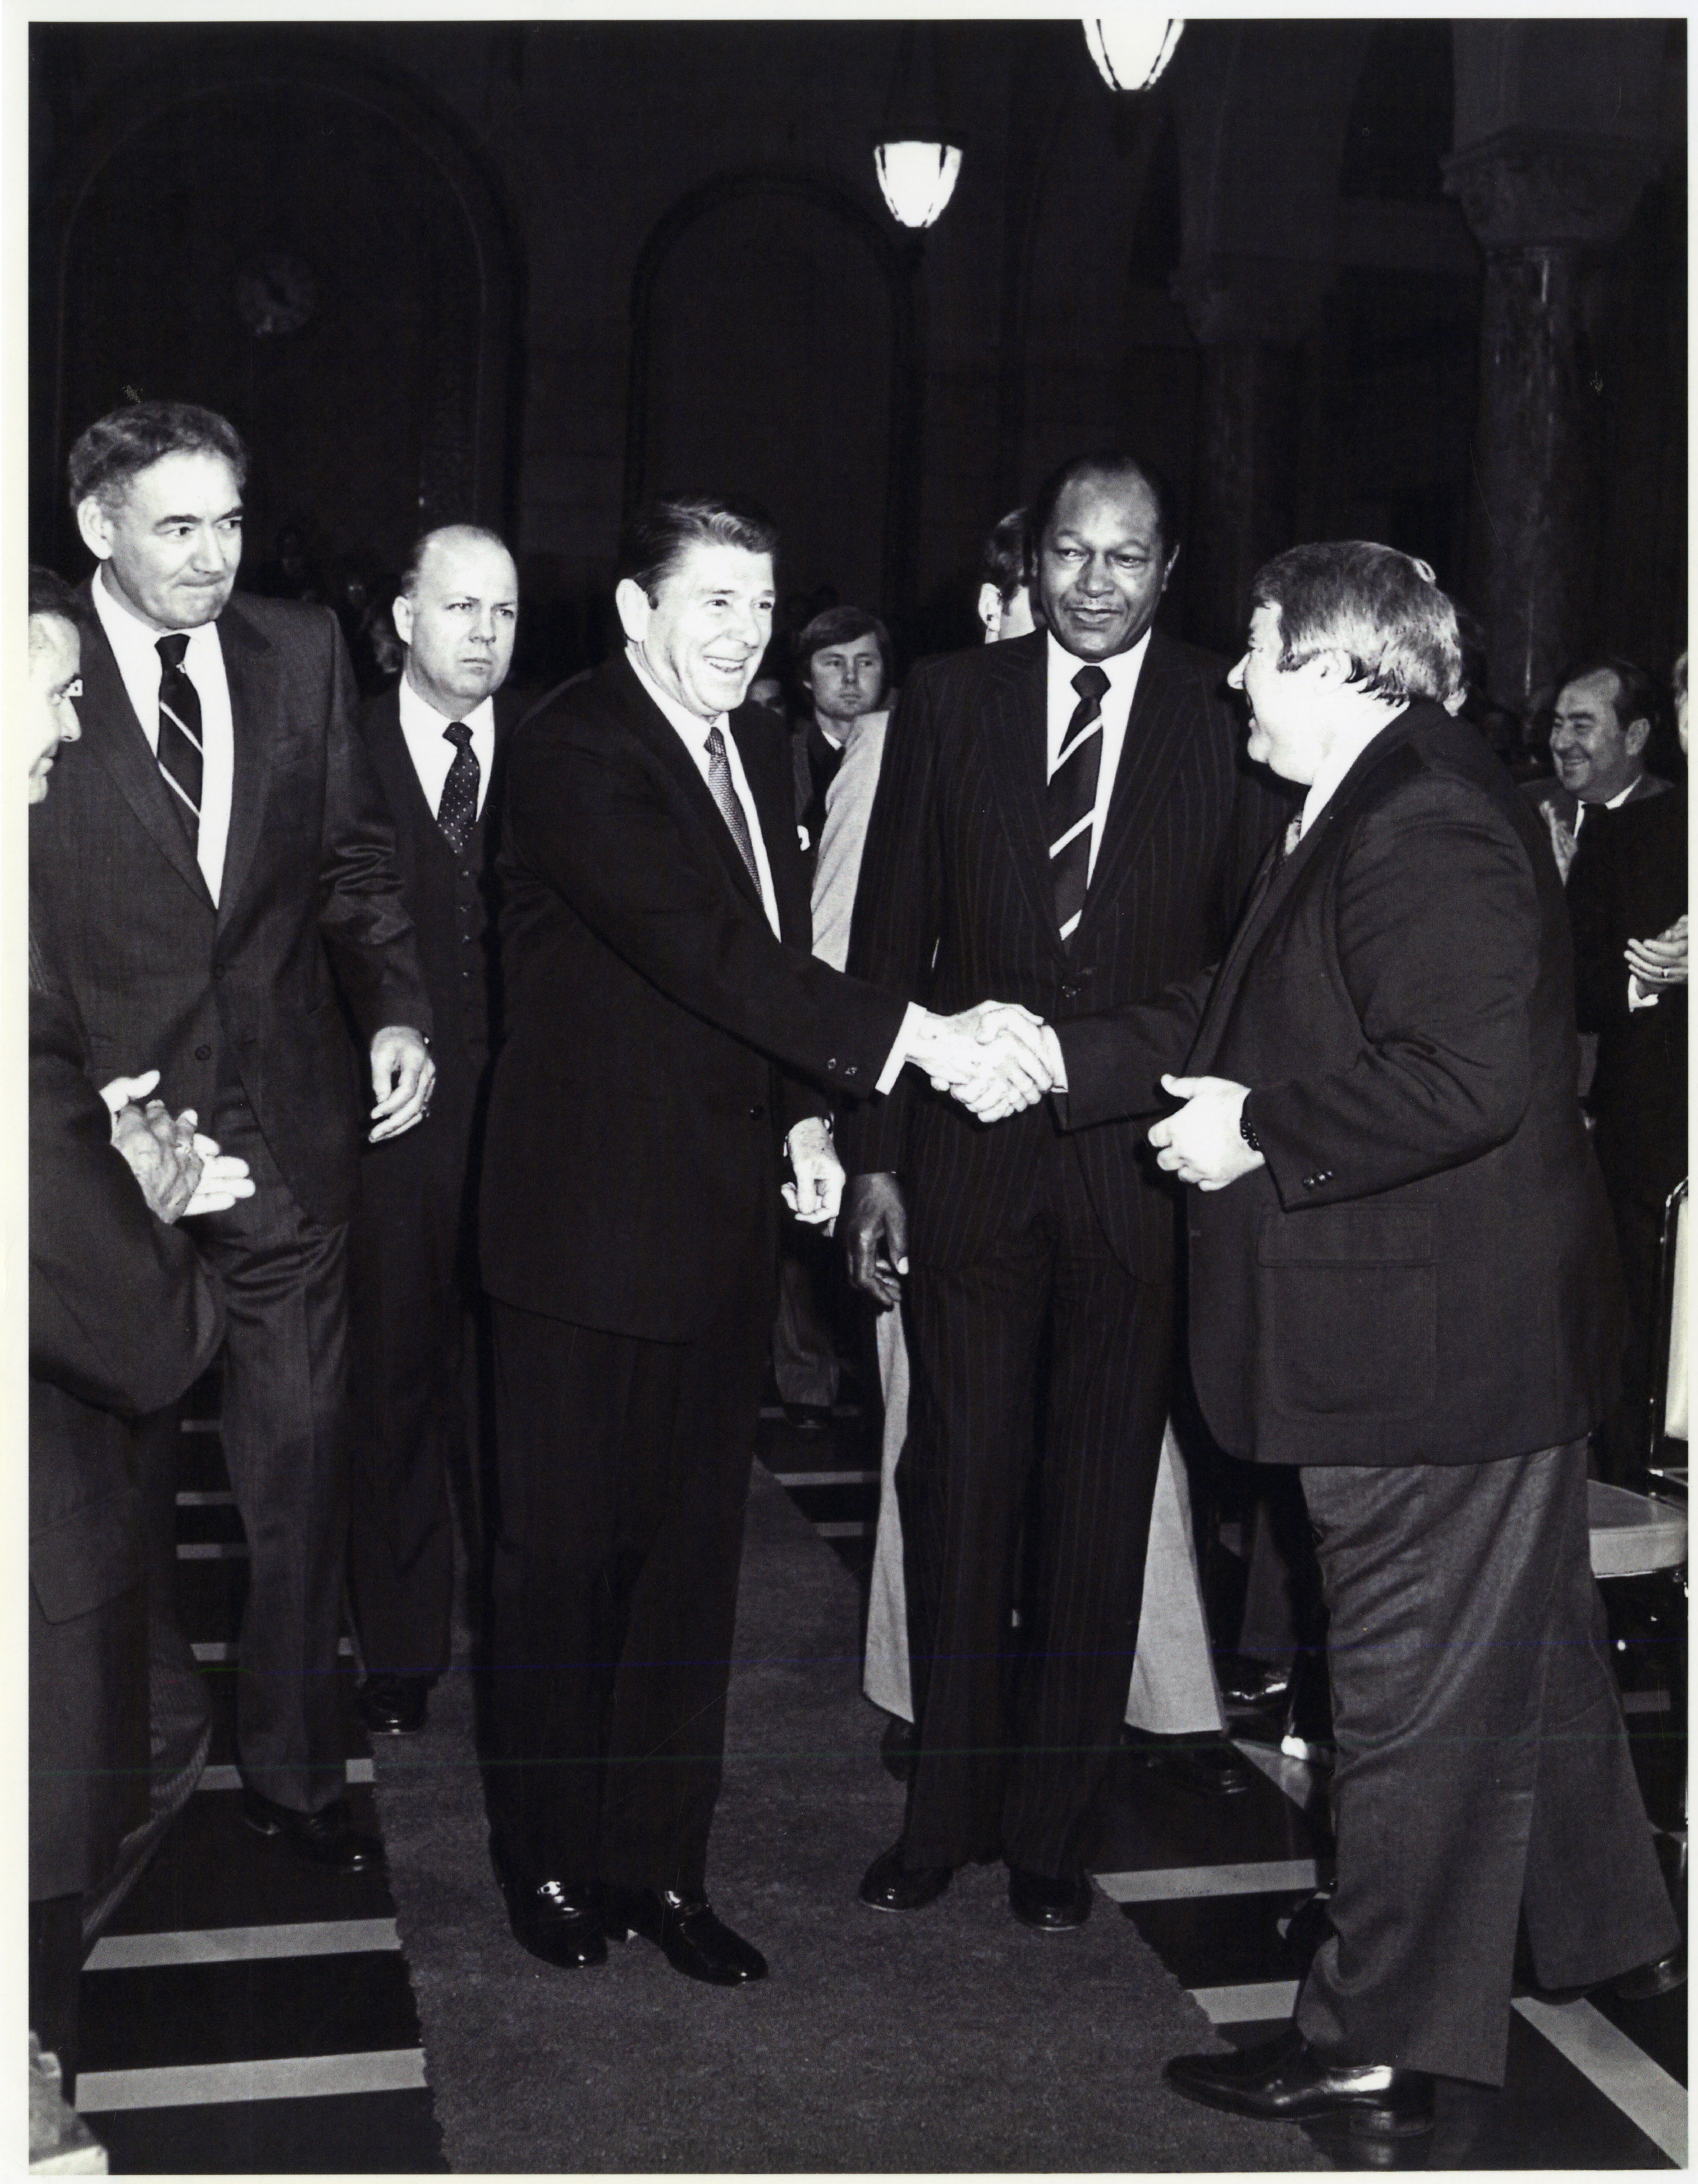 Ronald Reagan, Tom LaBonge and Tom Bradley and others at unknown event